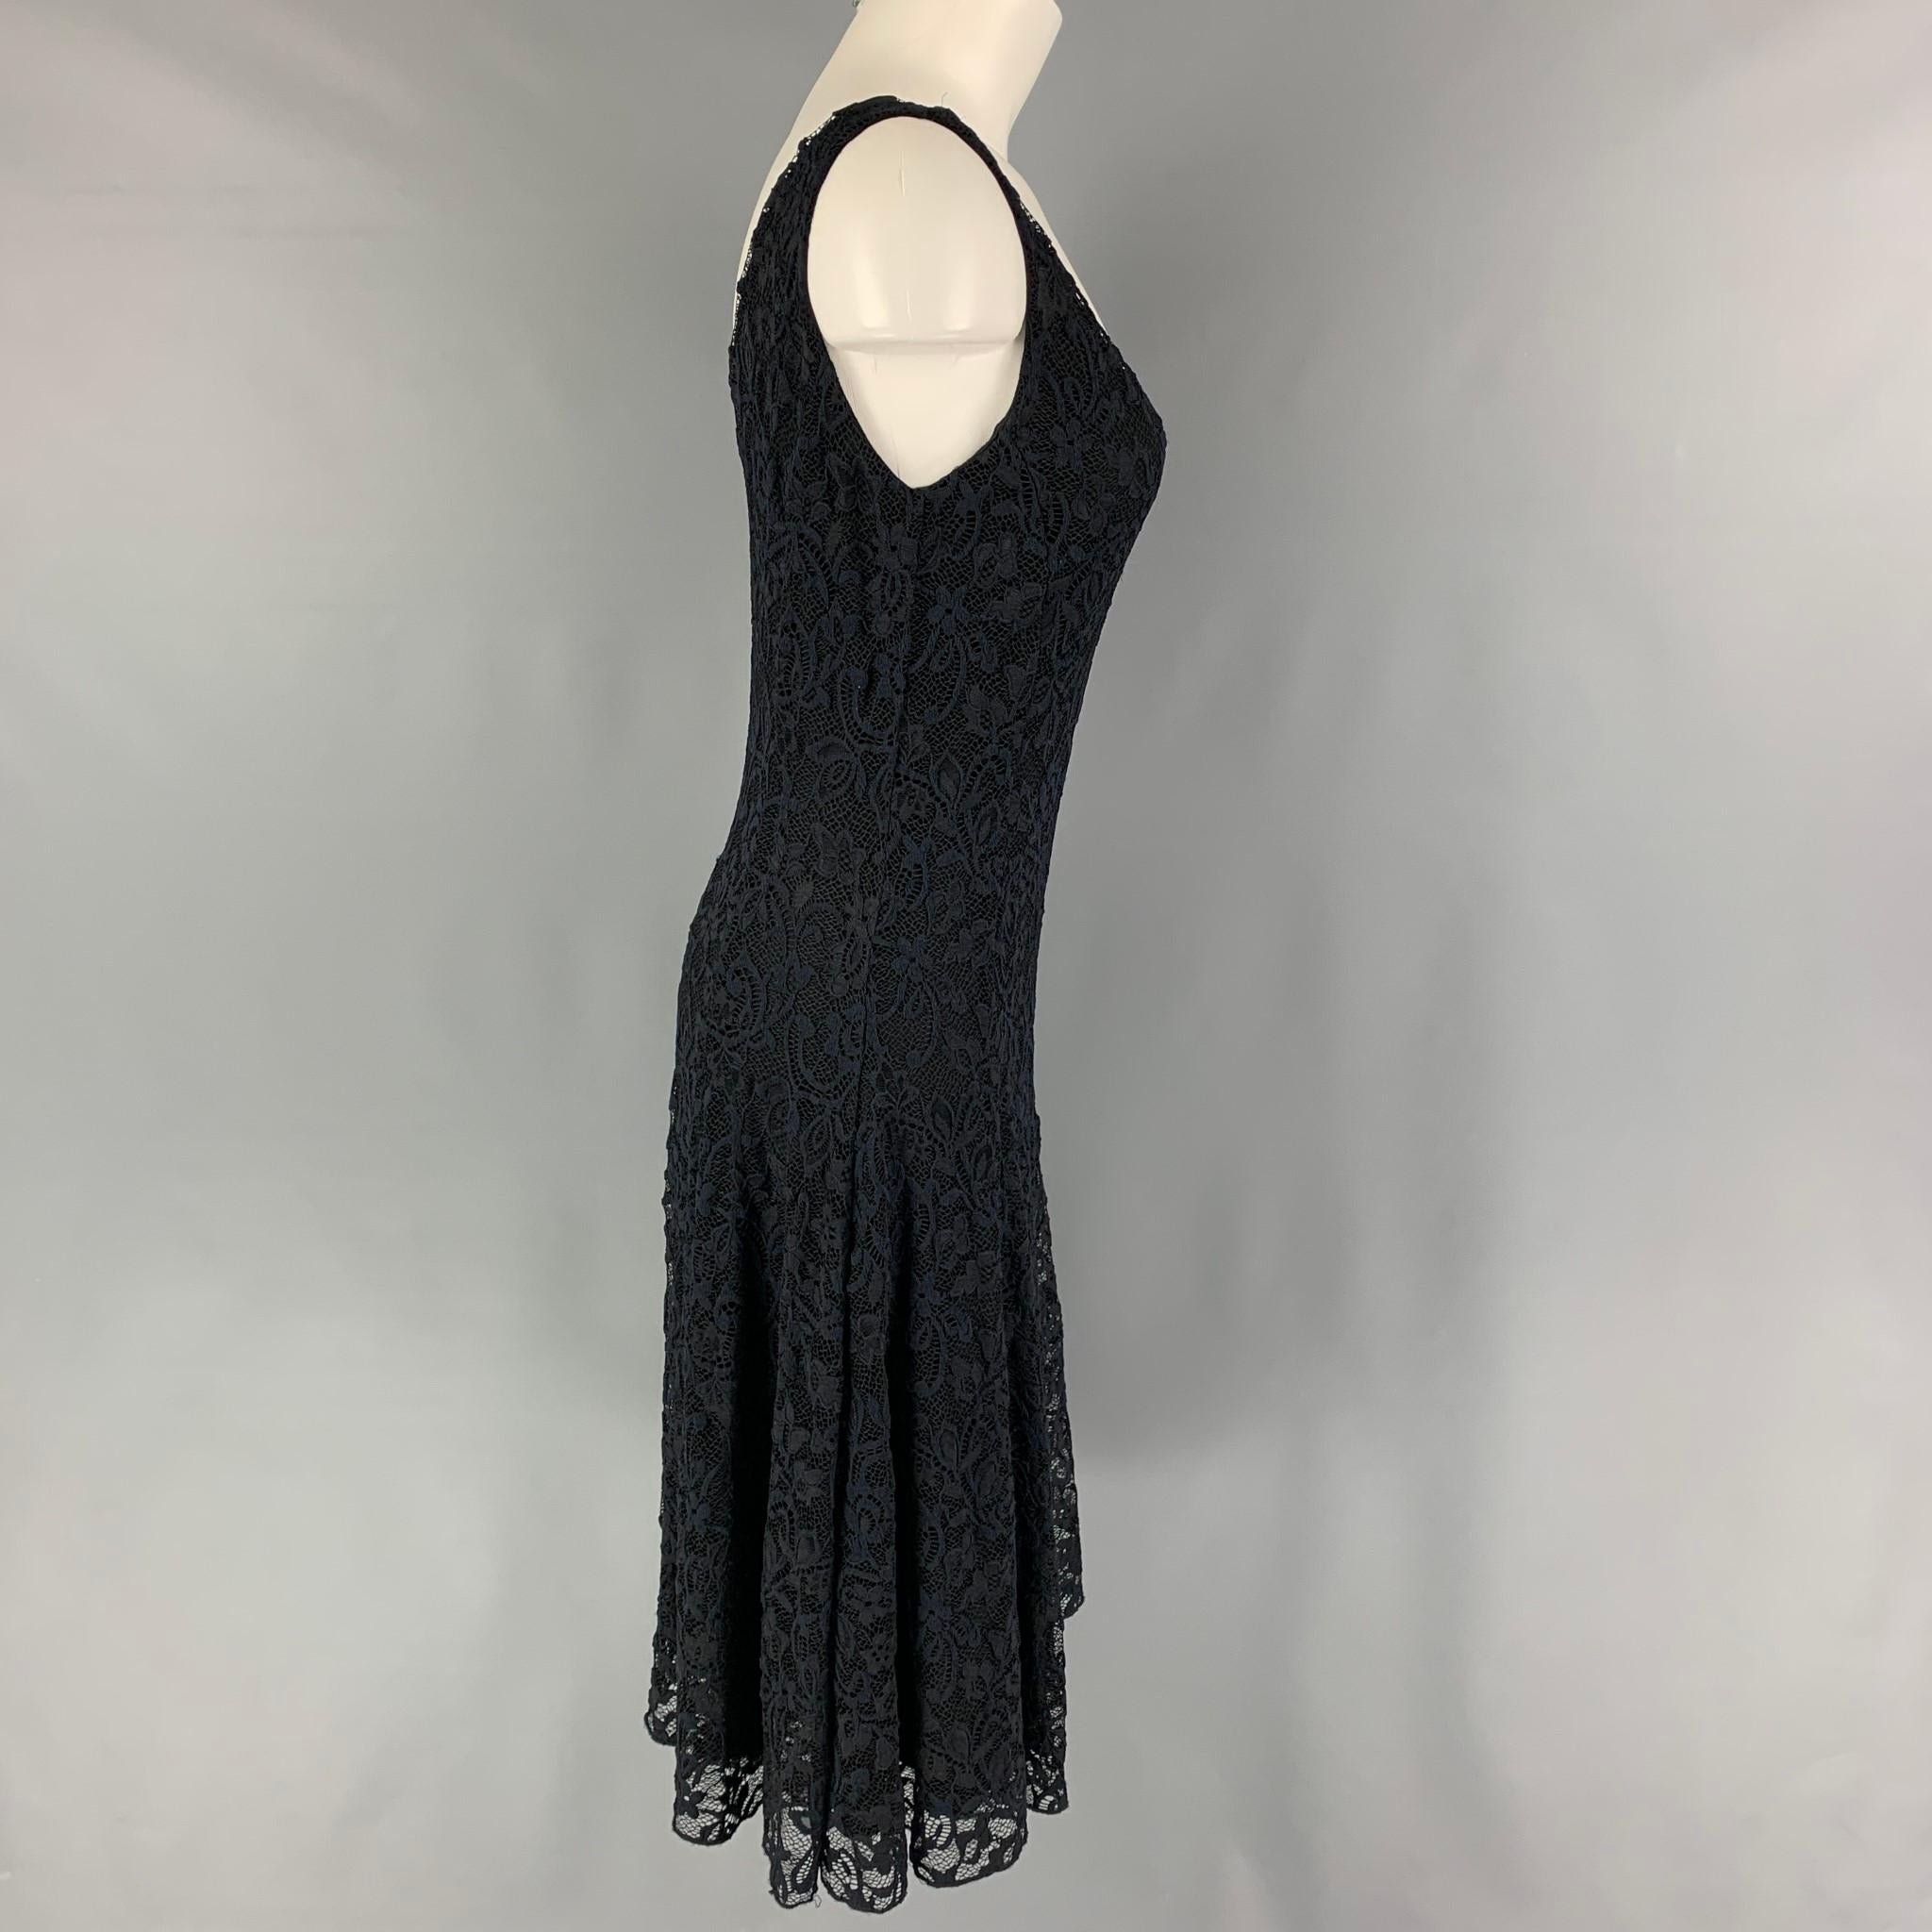 RALPH LAUREN Blue Label dress comes in a navy lace nylon with a slip liner featuring an a-line style, sleeveless, and a v-neck. 

Excellent Pre-Owned Condition.
Marked: L

Measurements:

Bust: 30 in.
Waist: 28 in.
Hip: 36 in.
Length: 32.5 in.